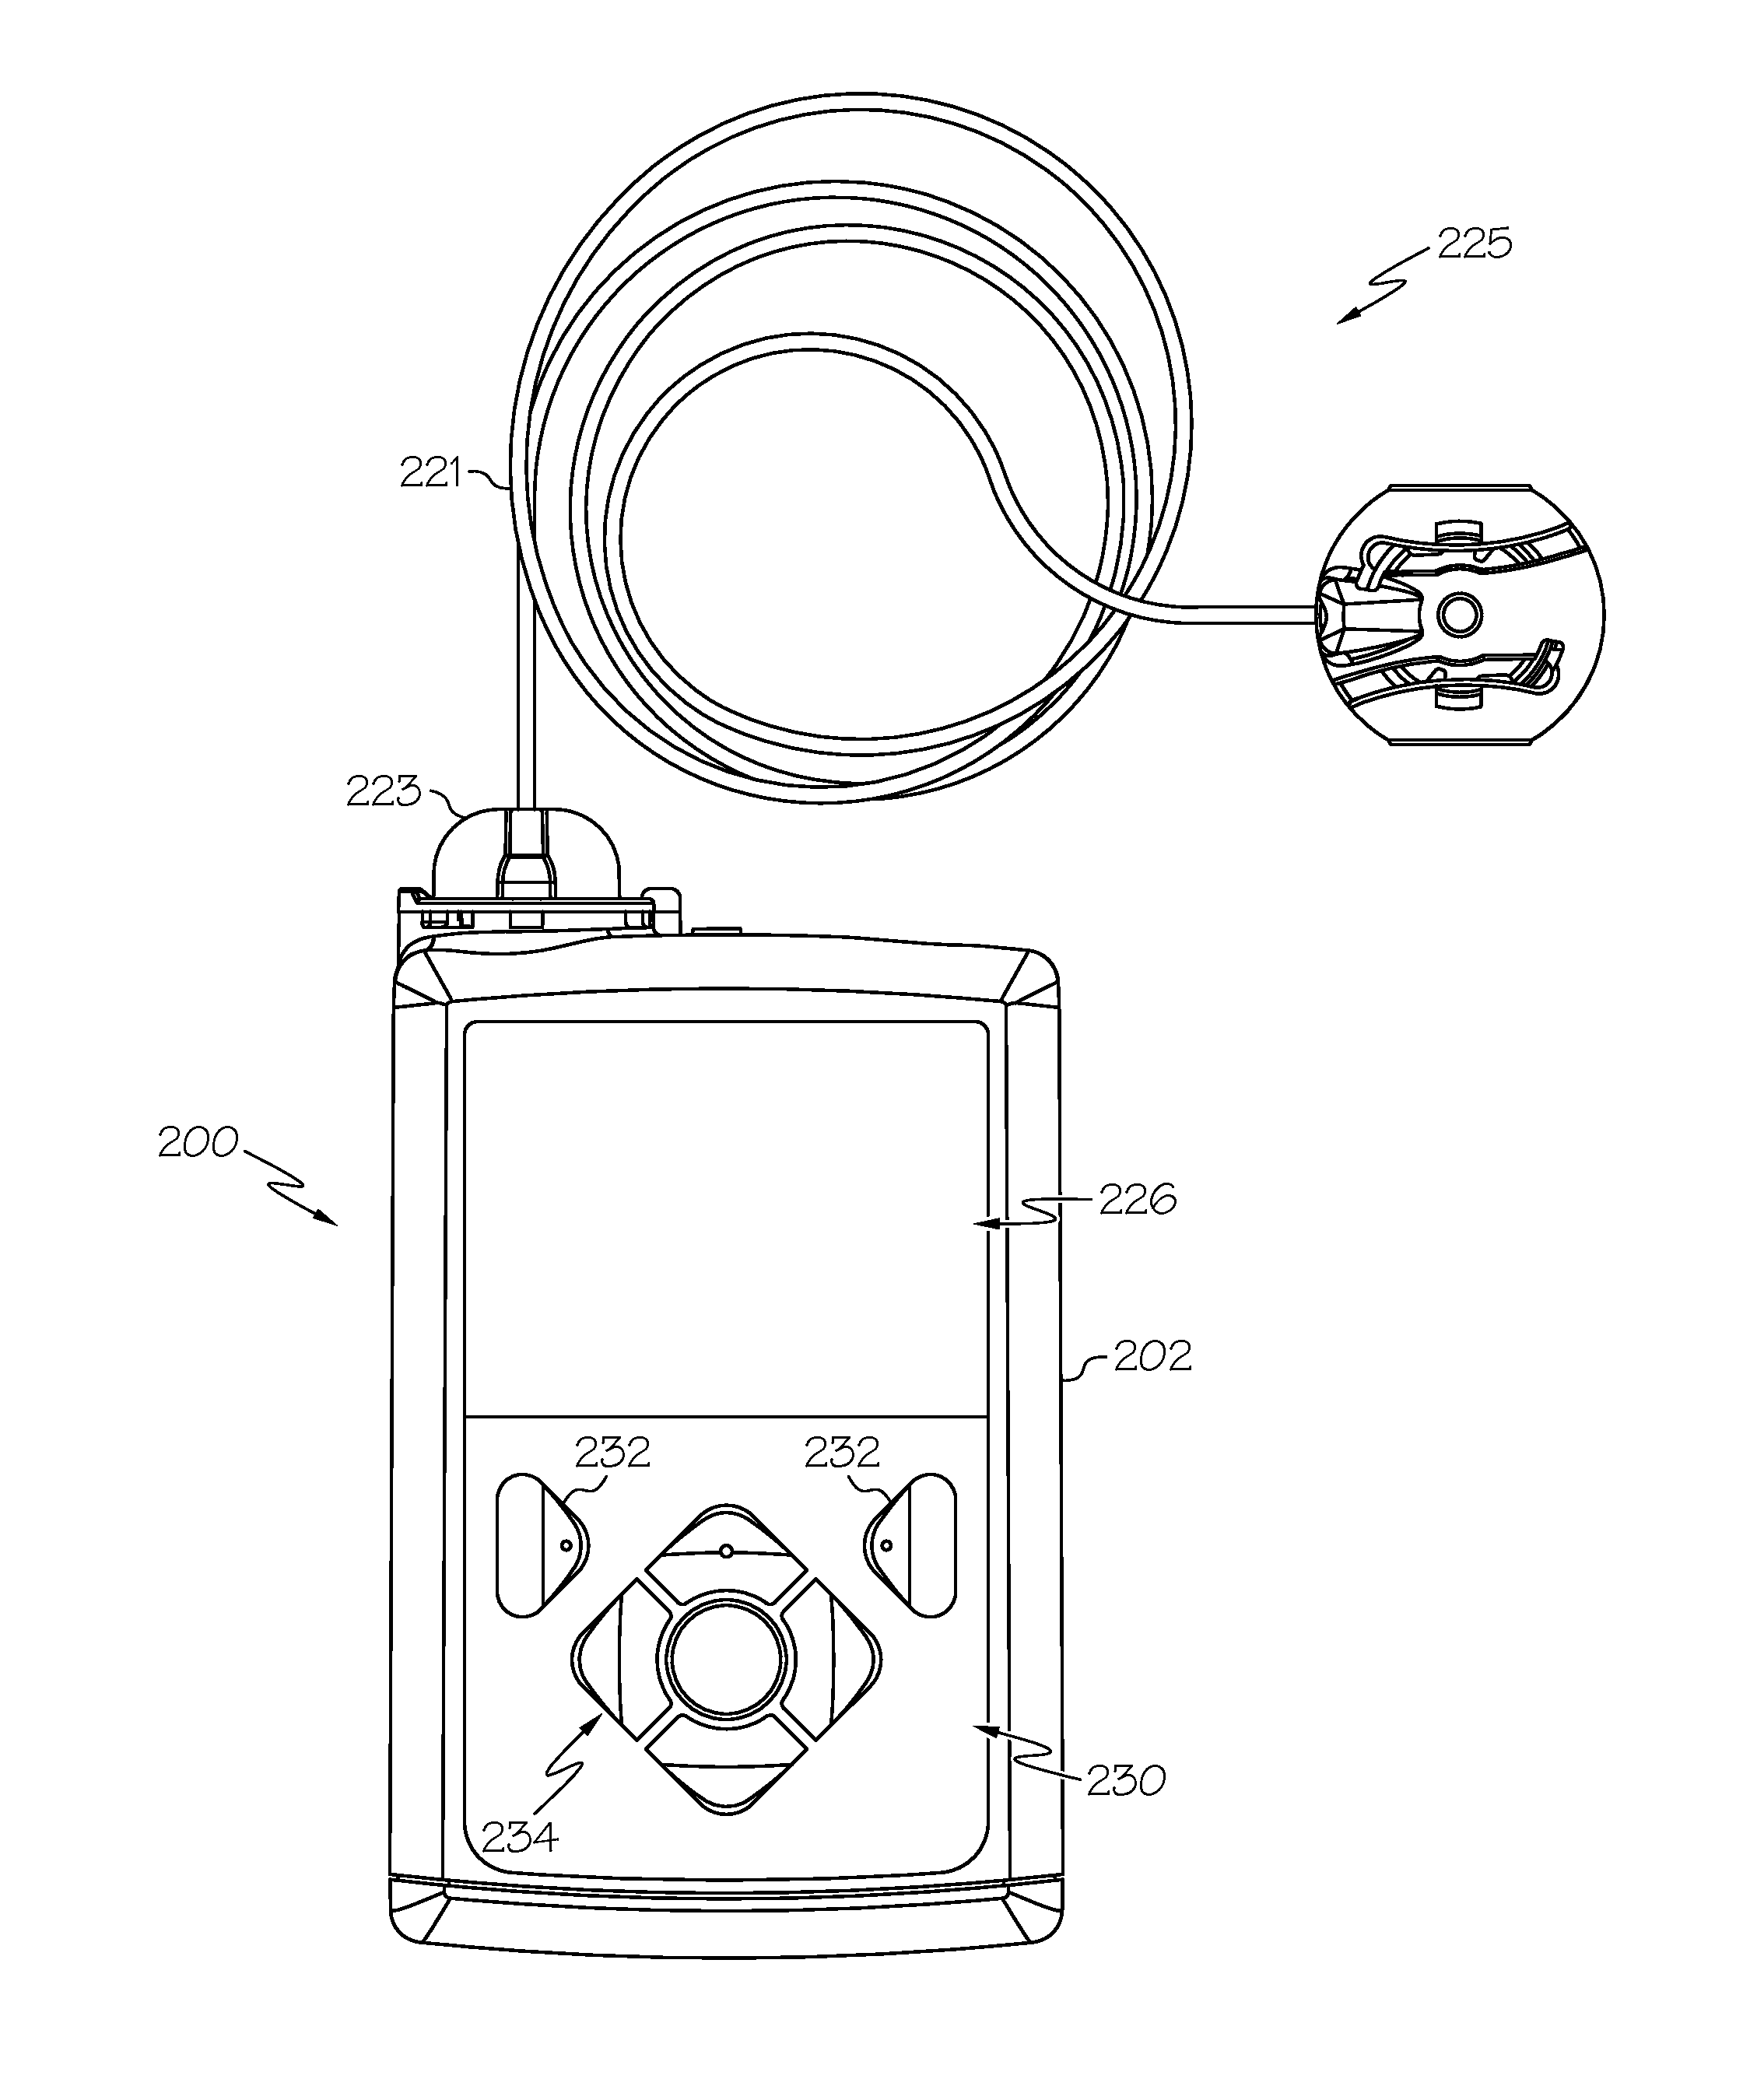 Advance diagnosis of infusion device operating mode viability